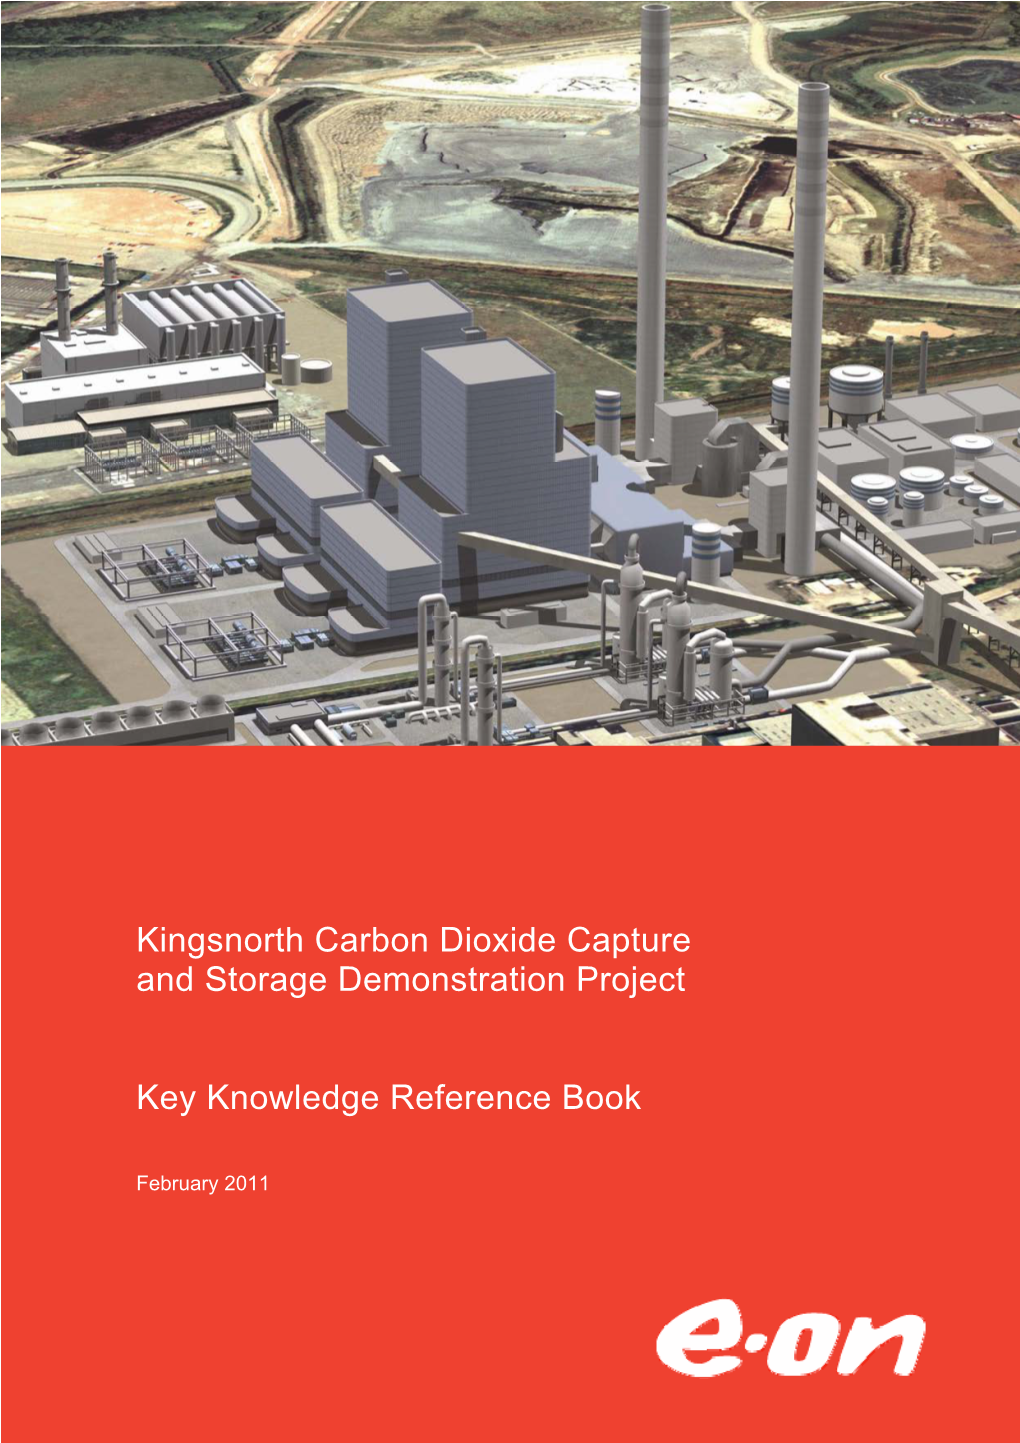 Kingsnorth Carbon Dioxide Capture and Storage Demonstration Project